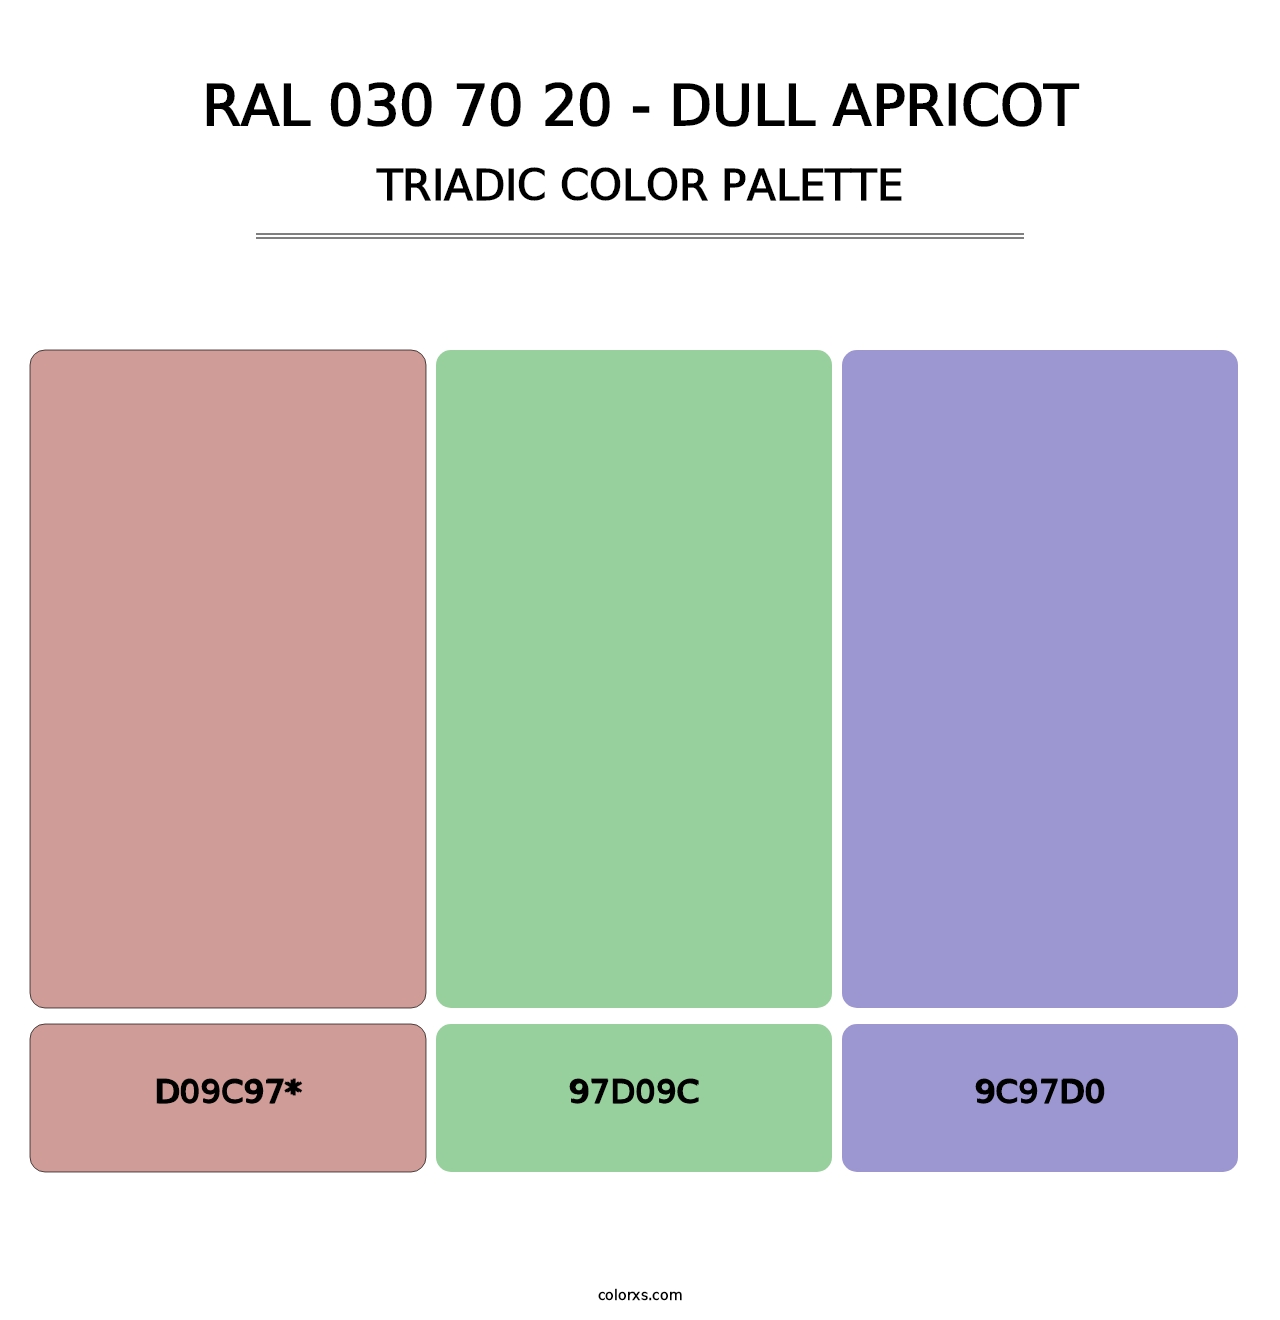 RAL 030 70 20 - Dull Apricot - Triadic Color Palette